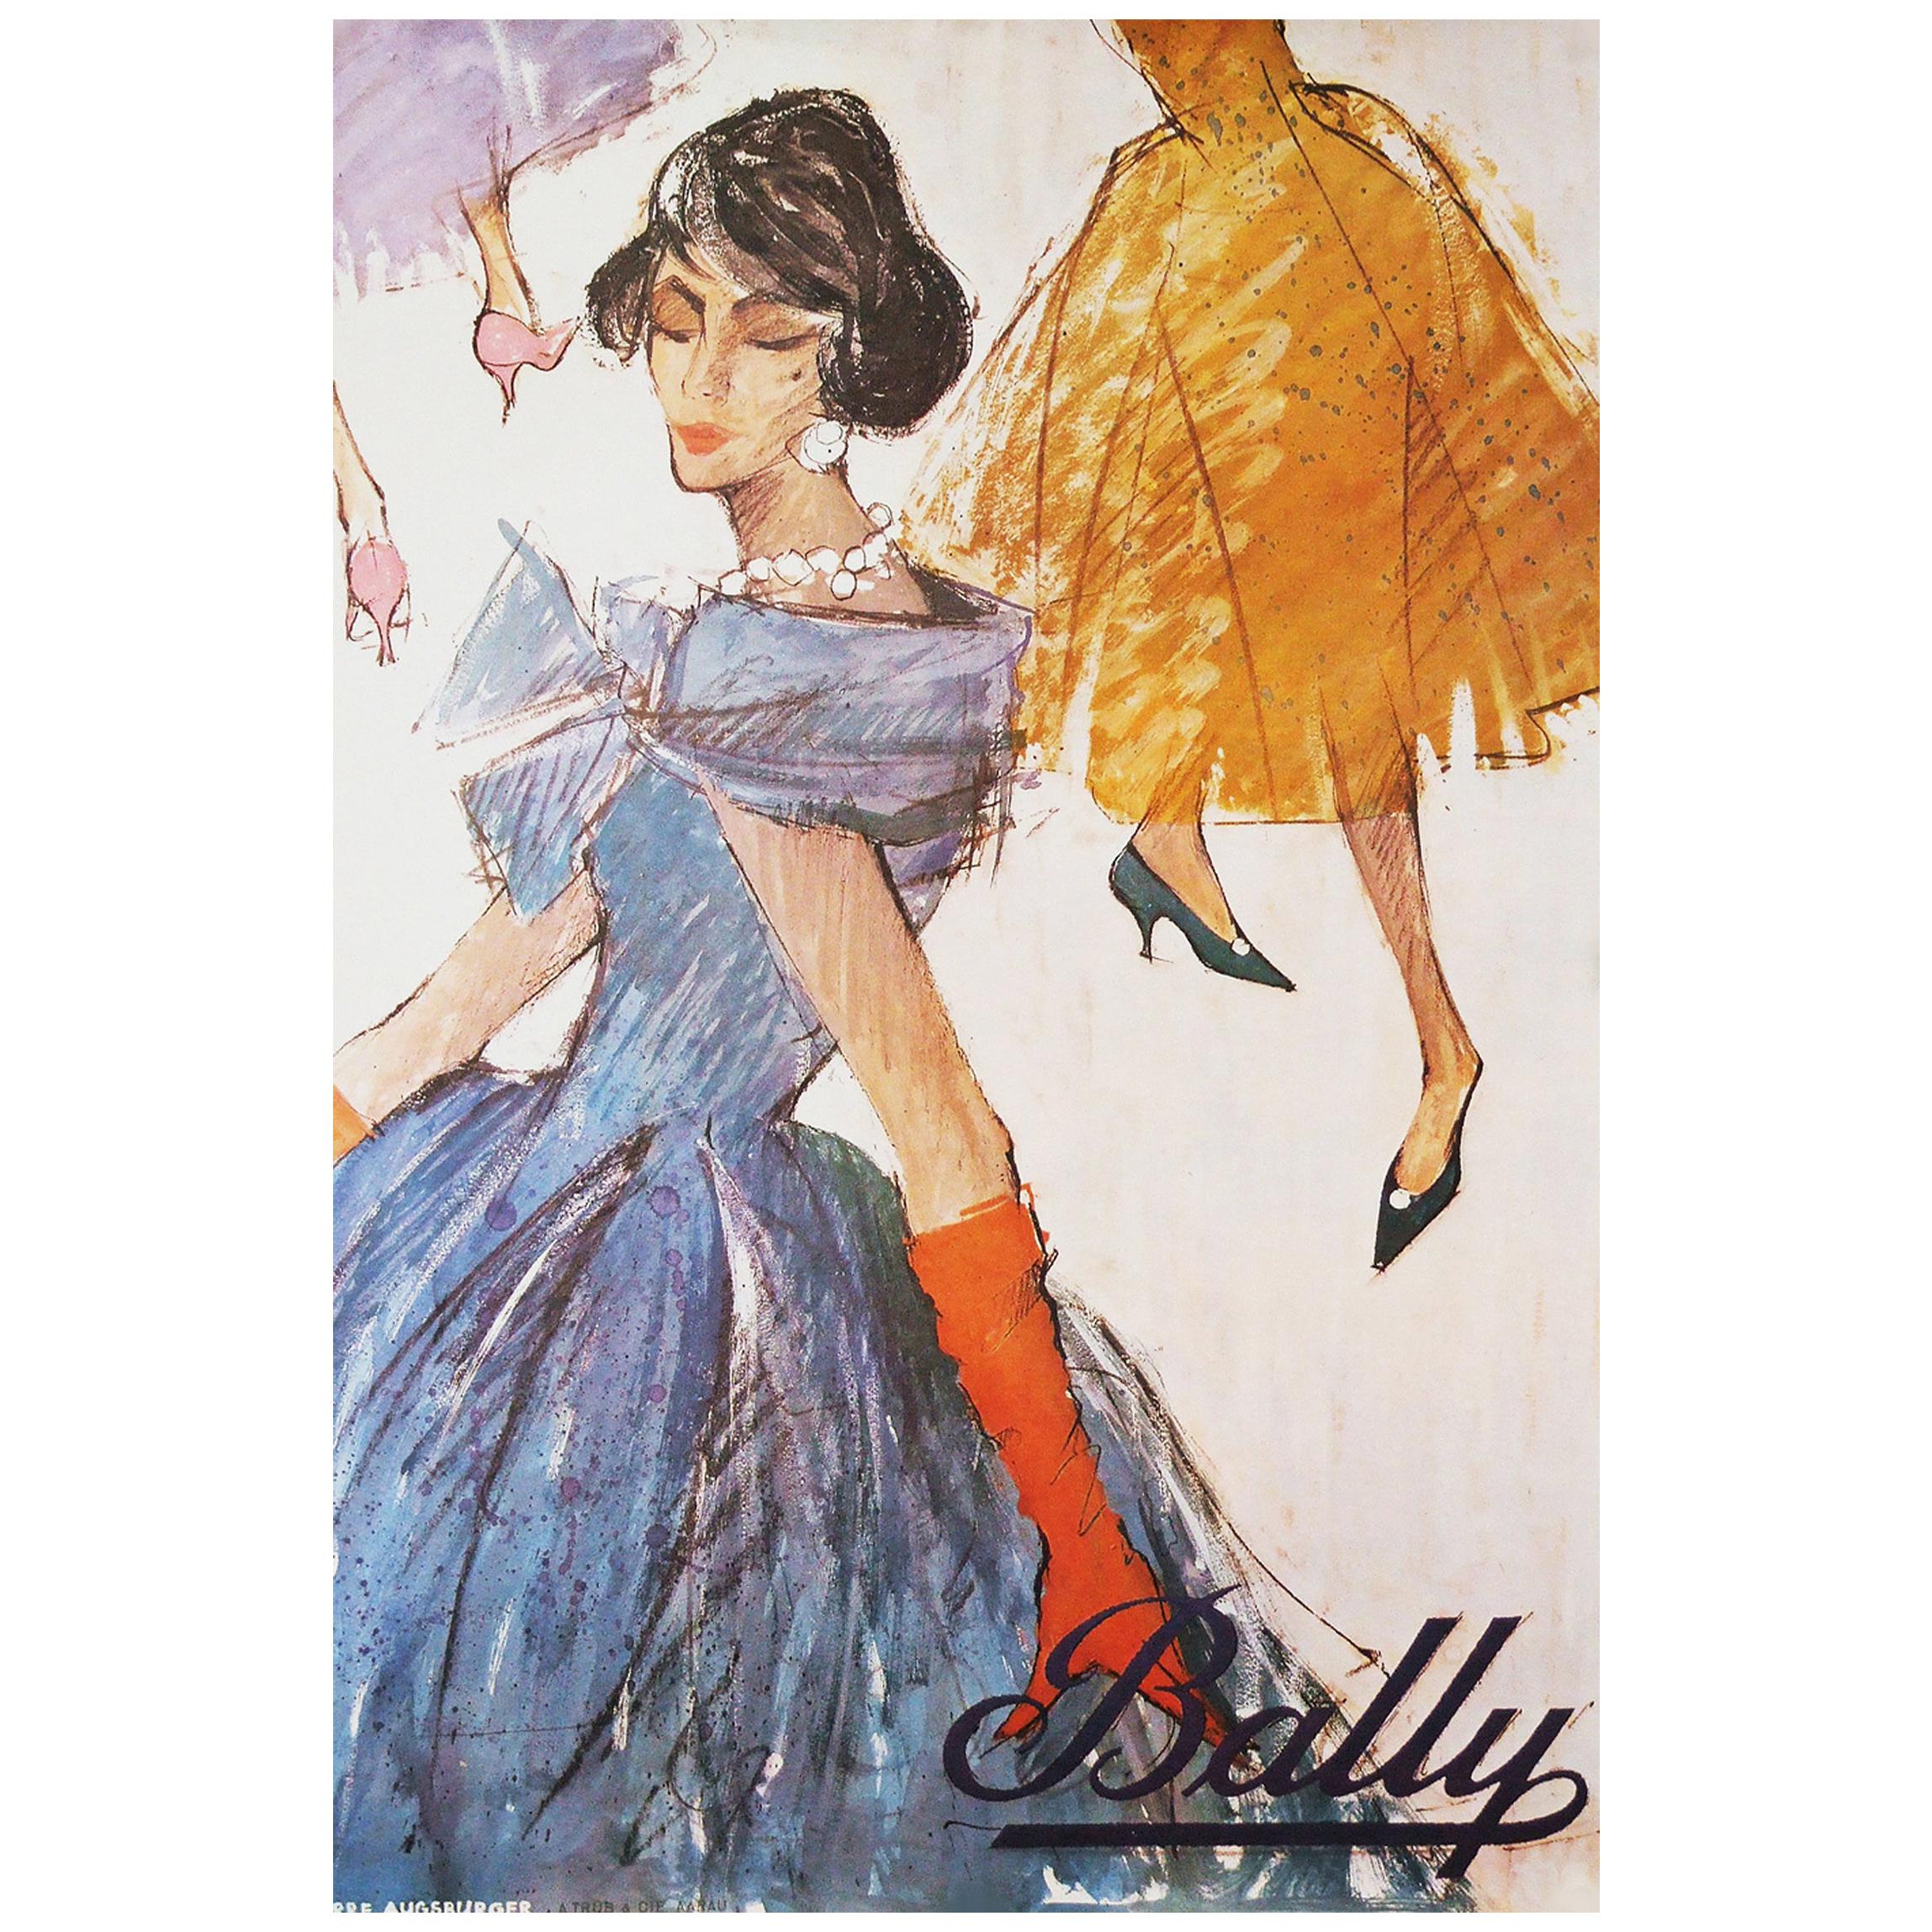 Original 1958 advertising poster for bally shoes designed by Pierre Augsburger. Rolled.

Measures: H 76 cm x L 51.5 cm.